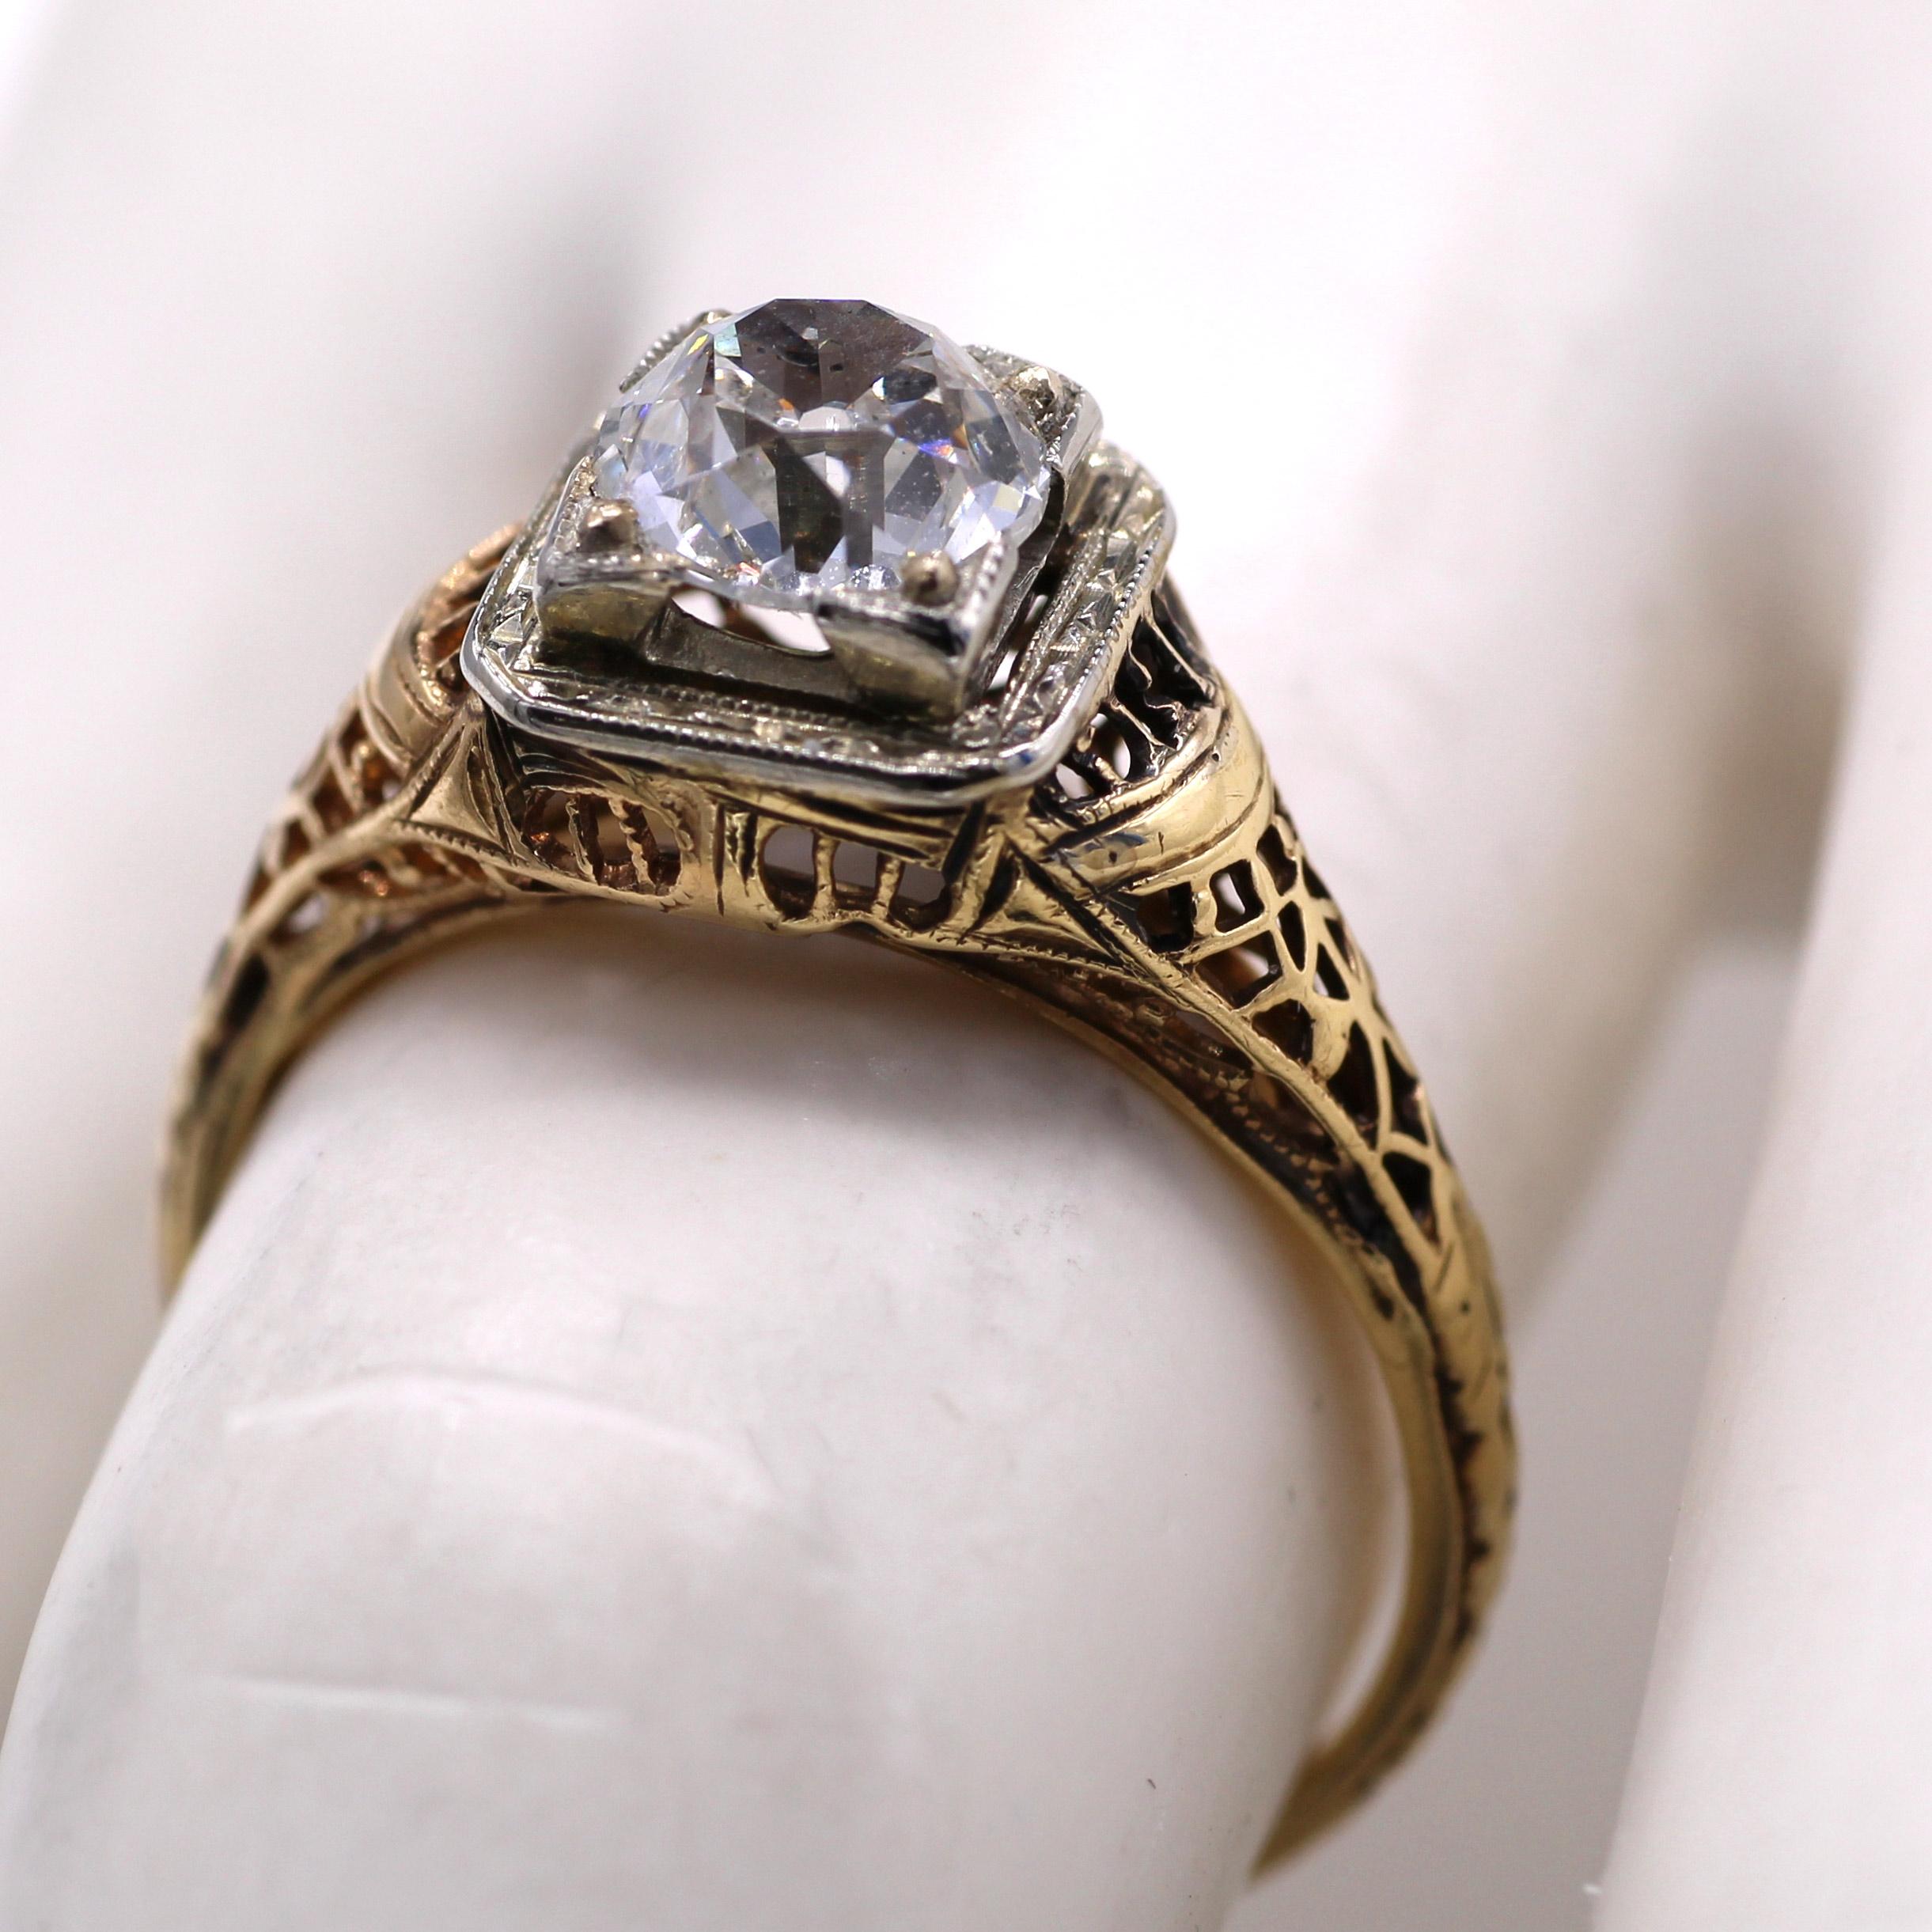 This charming engagement ring from ca 1930 has beautiful detailed ajour work all around the gallery and the shanks of the ring. Centrally set and slightly raised sits a bright and lively Antique Cushion brilliant weighing 1.04 carats. The diamond is